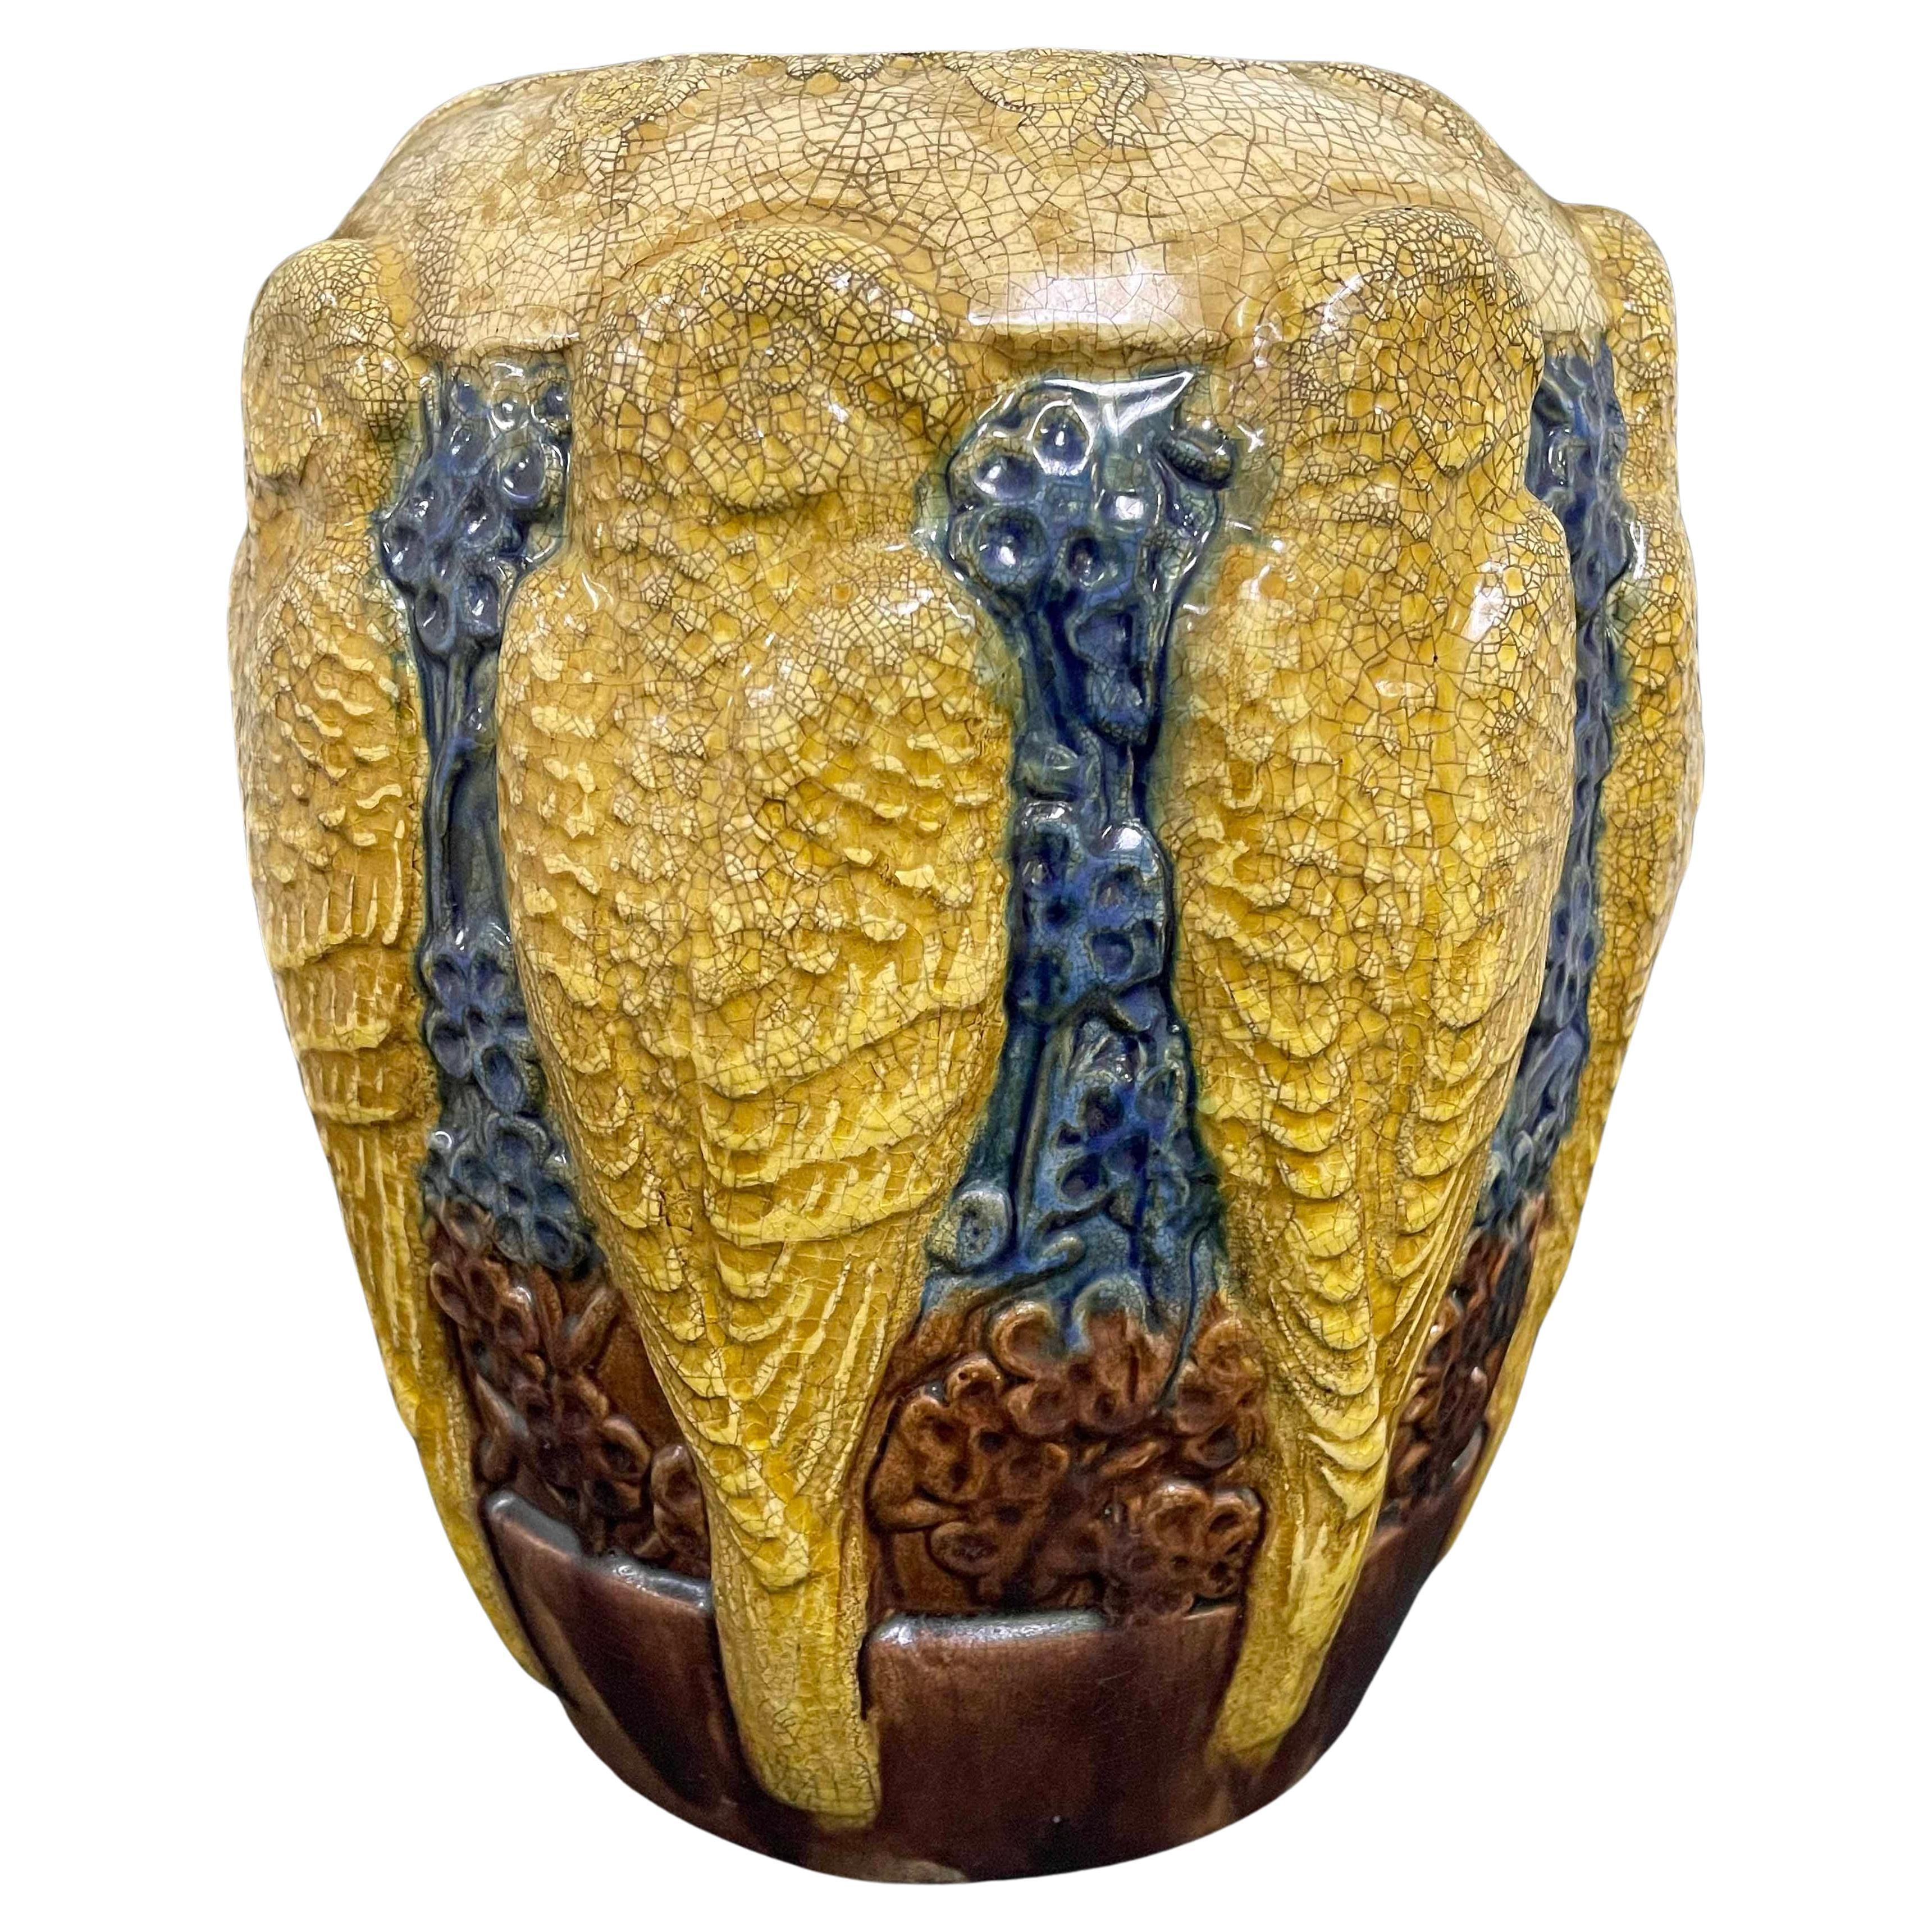 "Golden Parakeets", Large and Rare Art Deco Vase in Gold, Ivory and Deep Blue For Sale